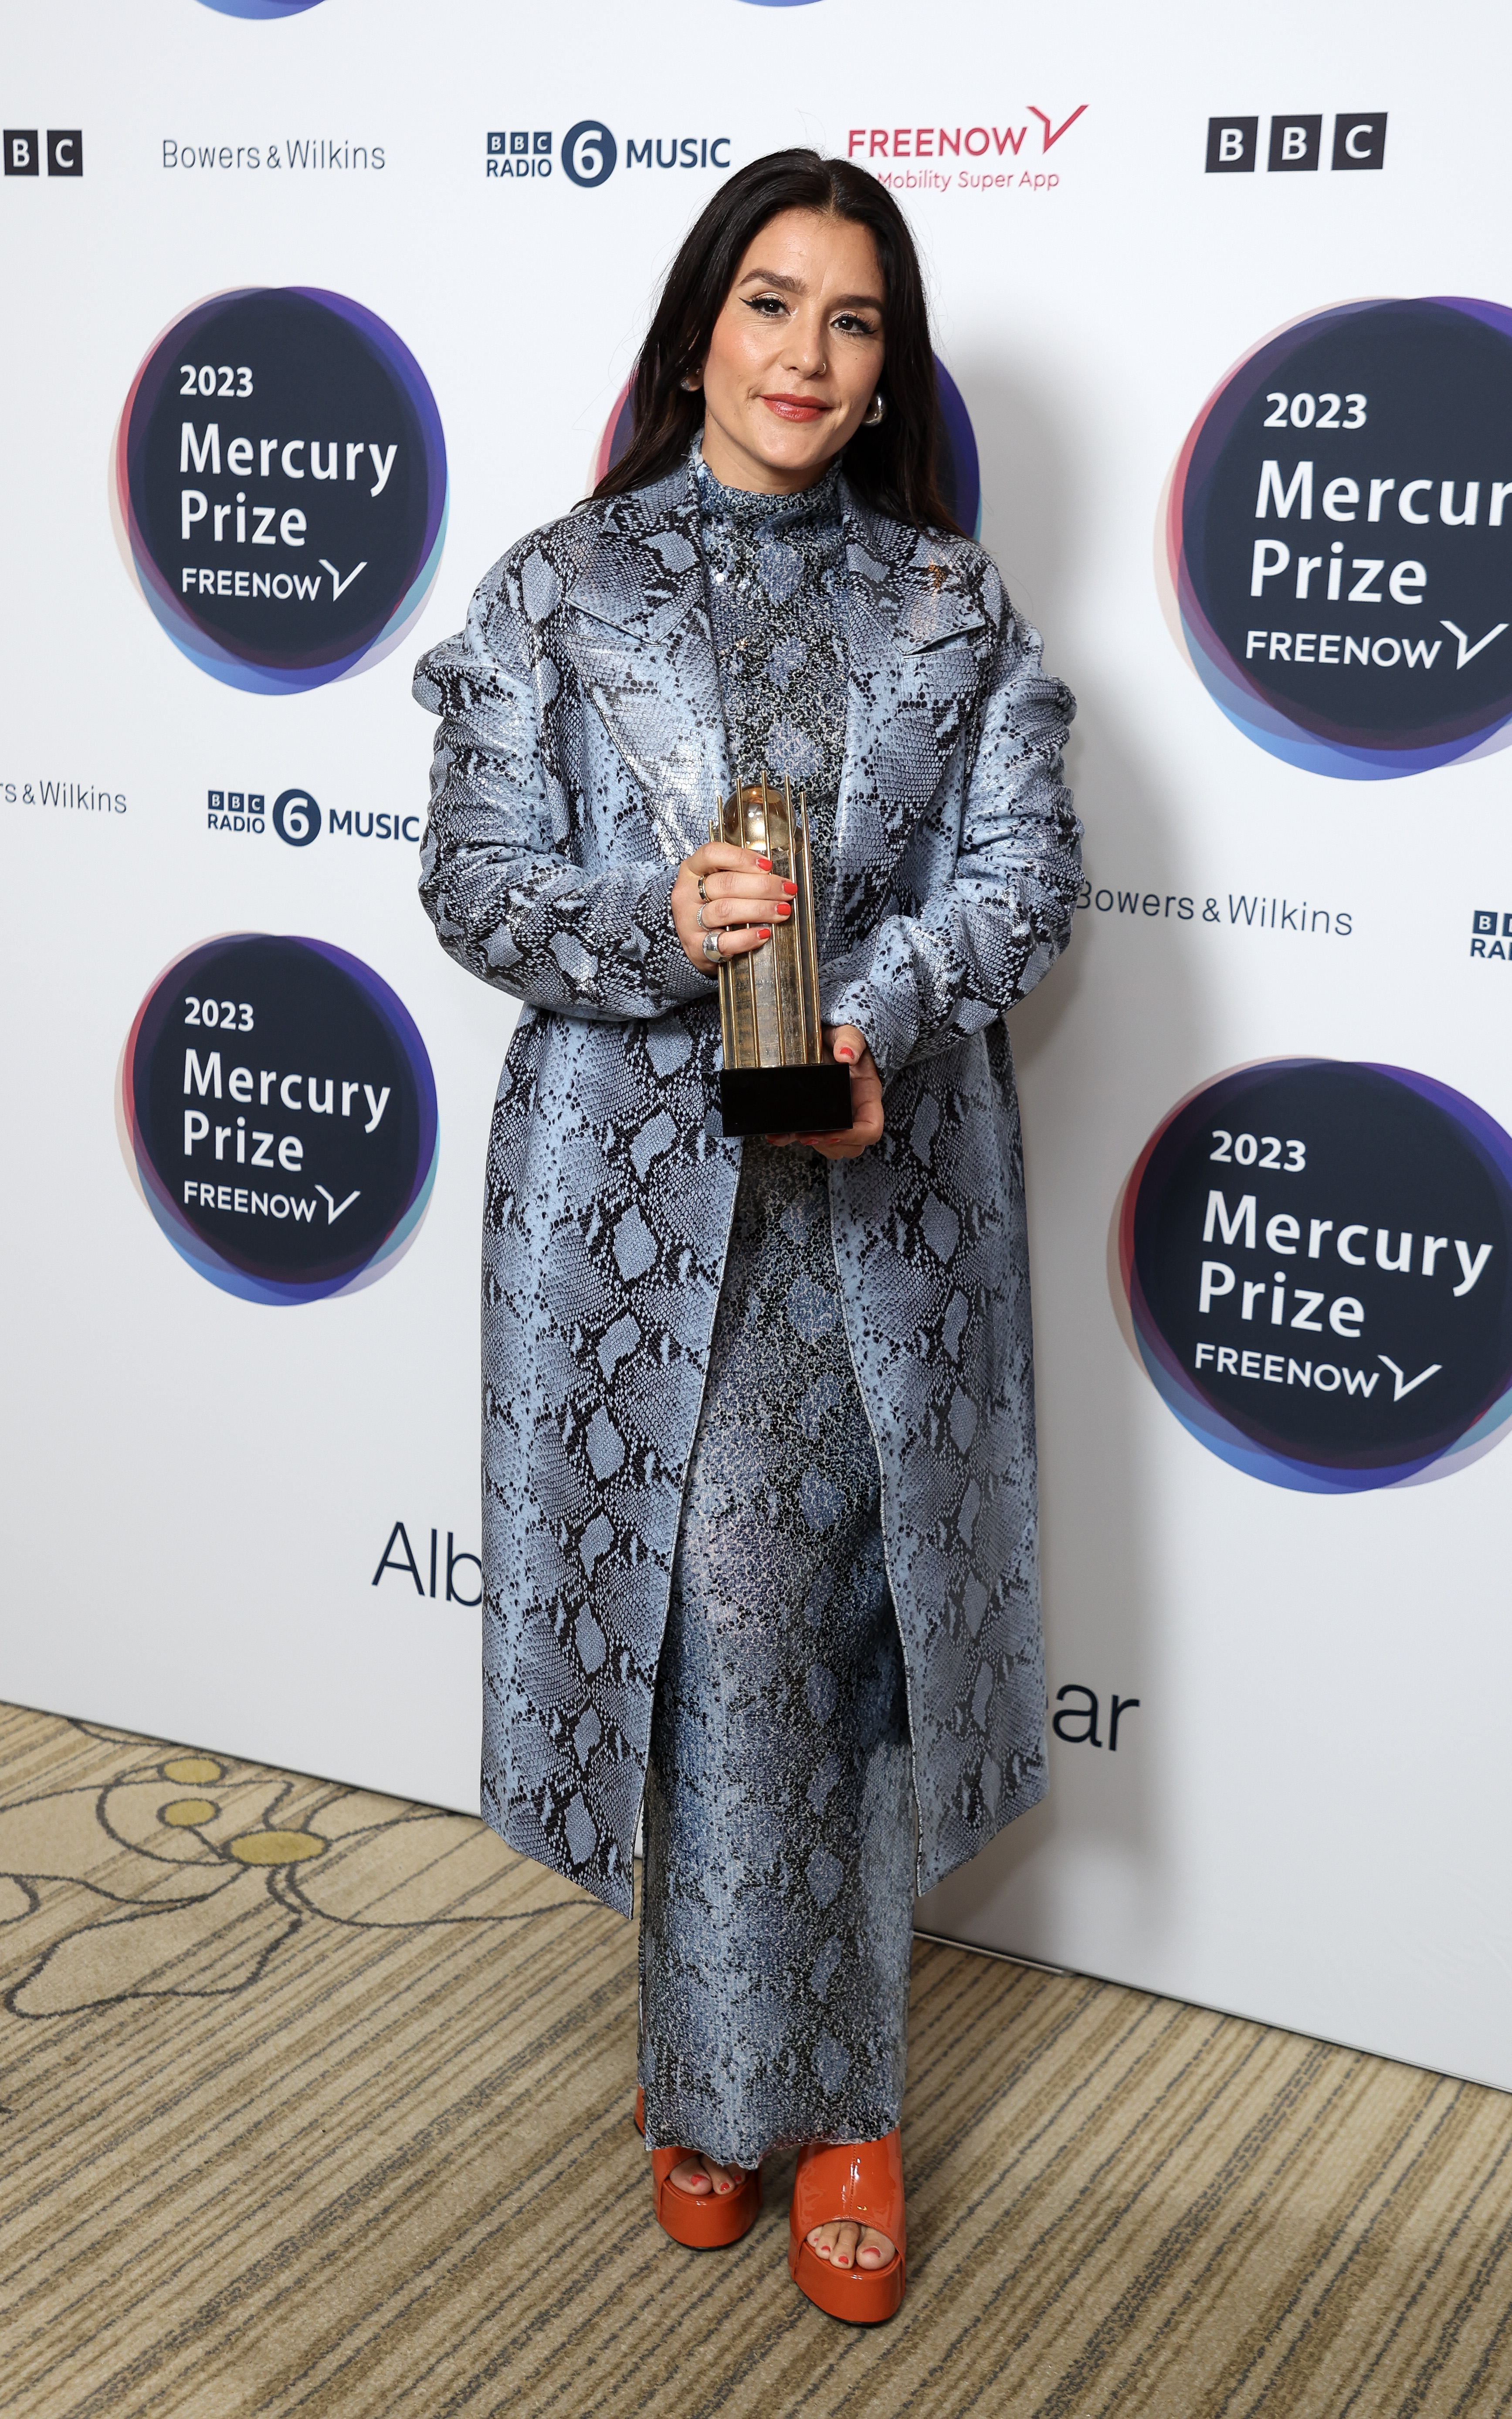 Jessie Ware collecting her nominee award for the Mercury Prize